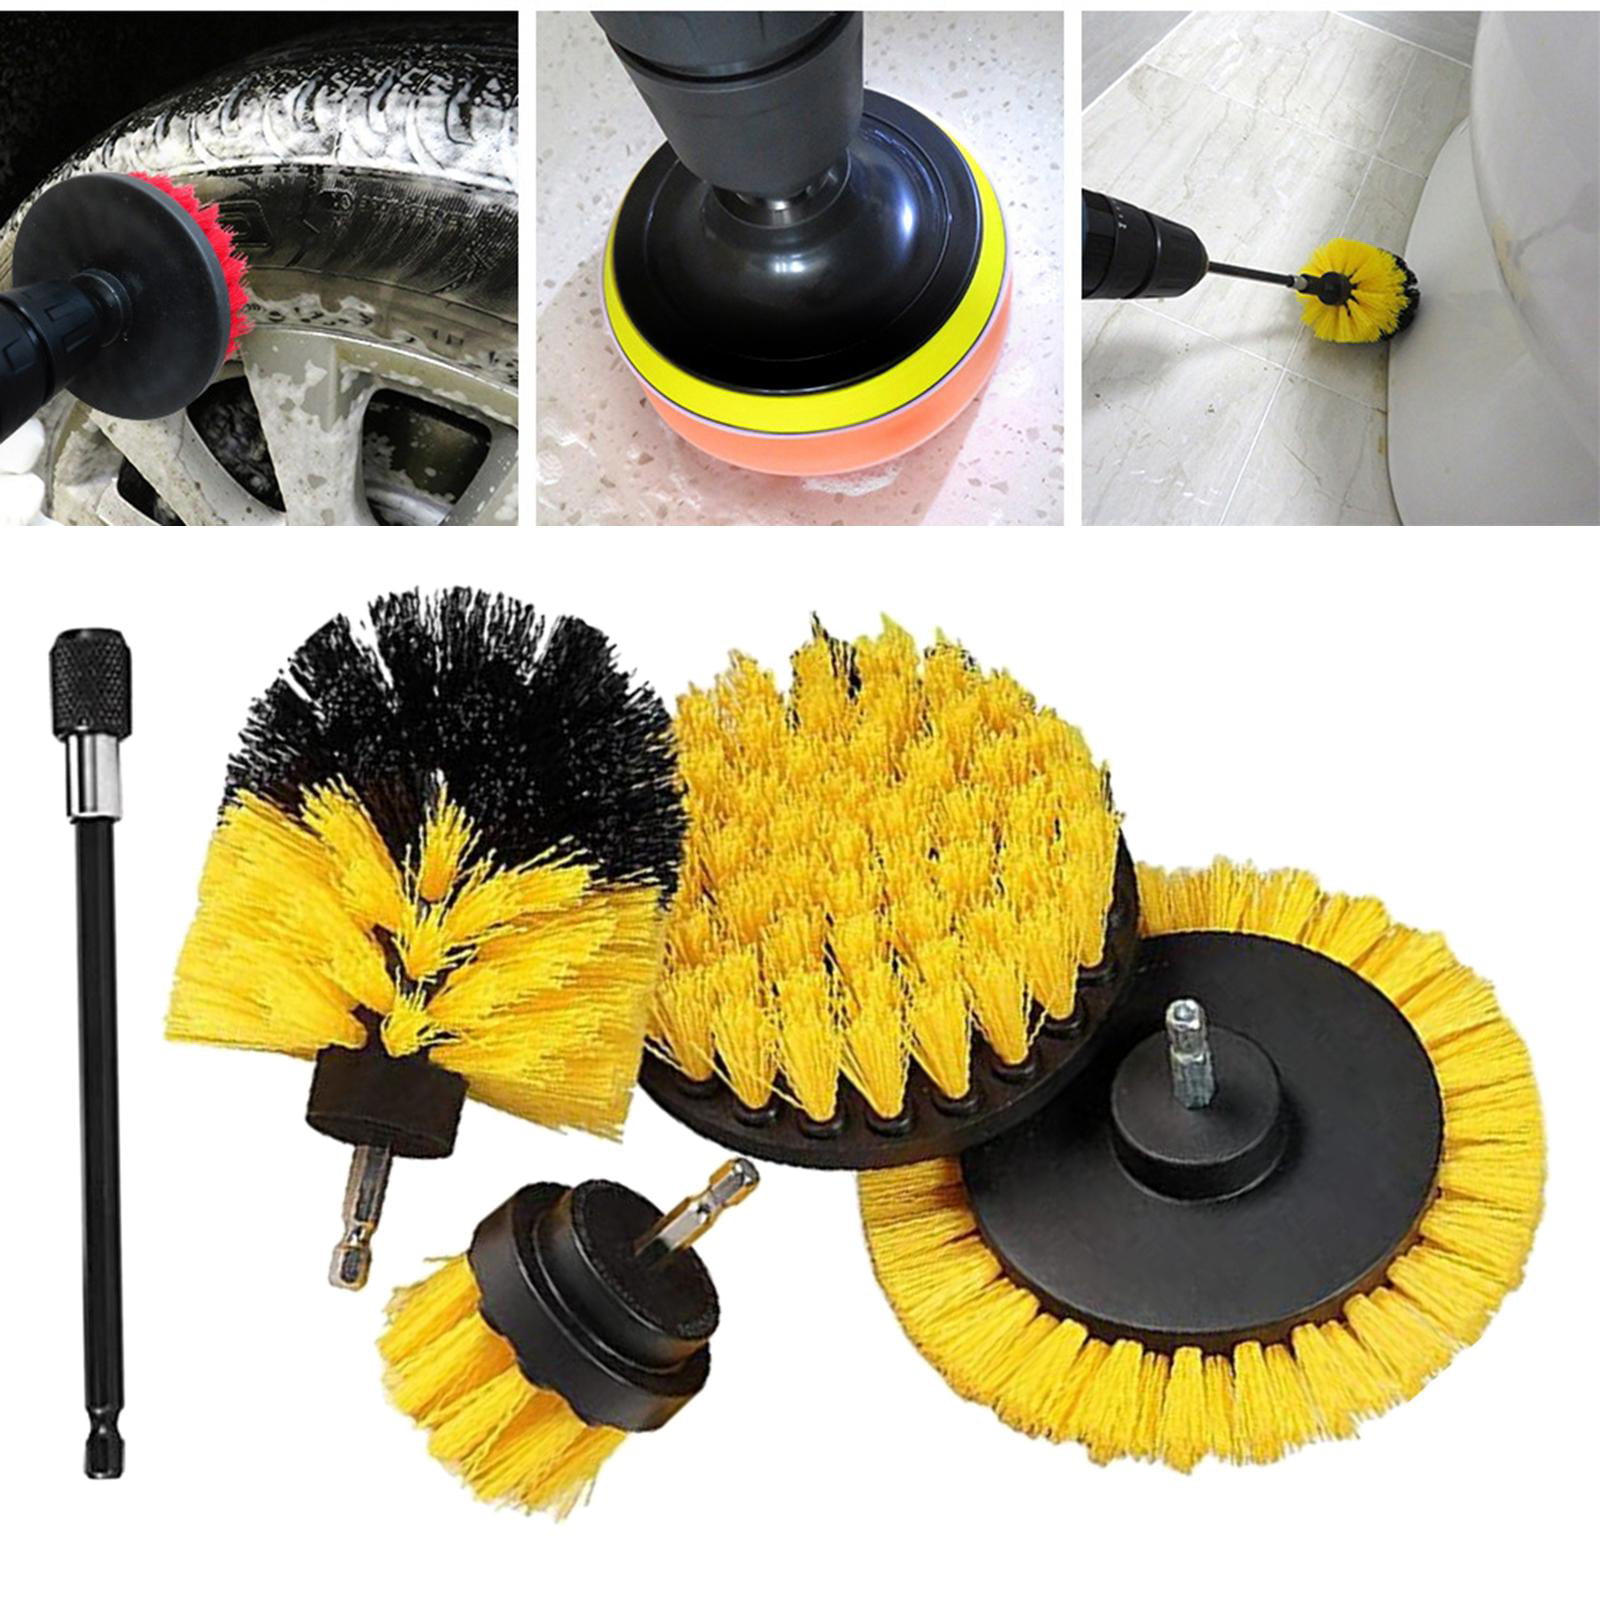 HIWARE Drill Brush Attachment Set, Yellow, Plastic Handle, 3 Sized Brush  Heads for Cleaning Bathtub, Shower, Floor, Carpet, Kitchen, Bathroom, and